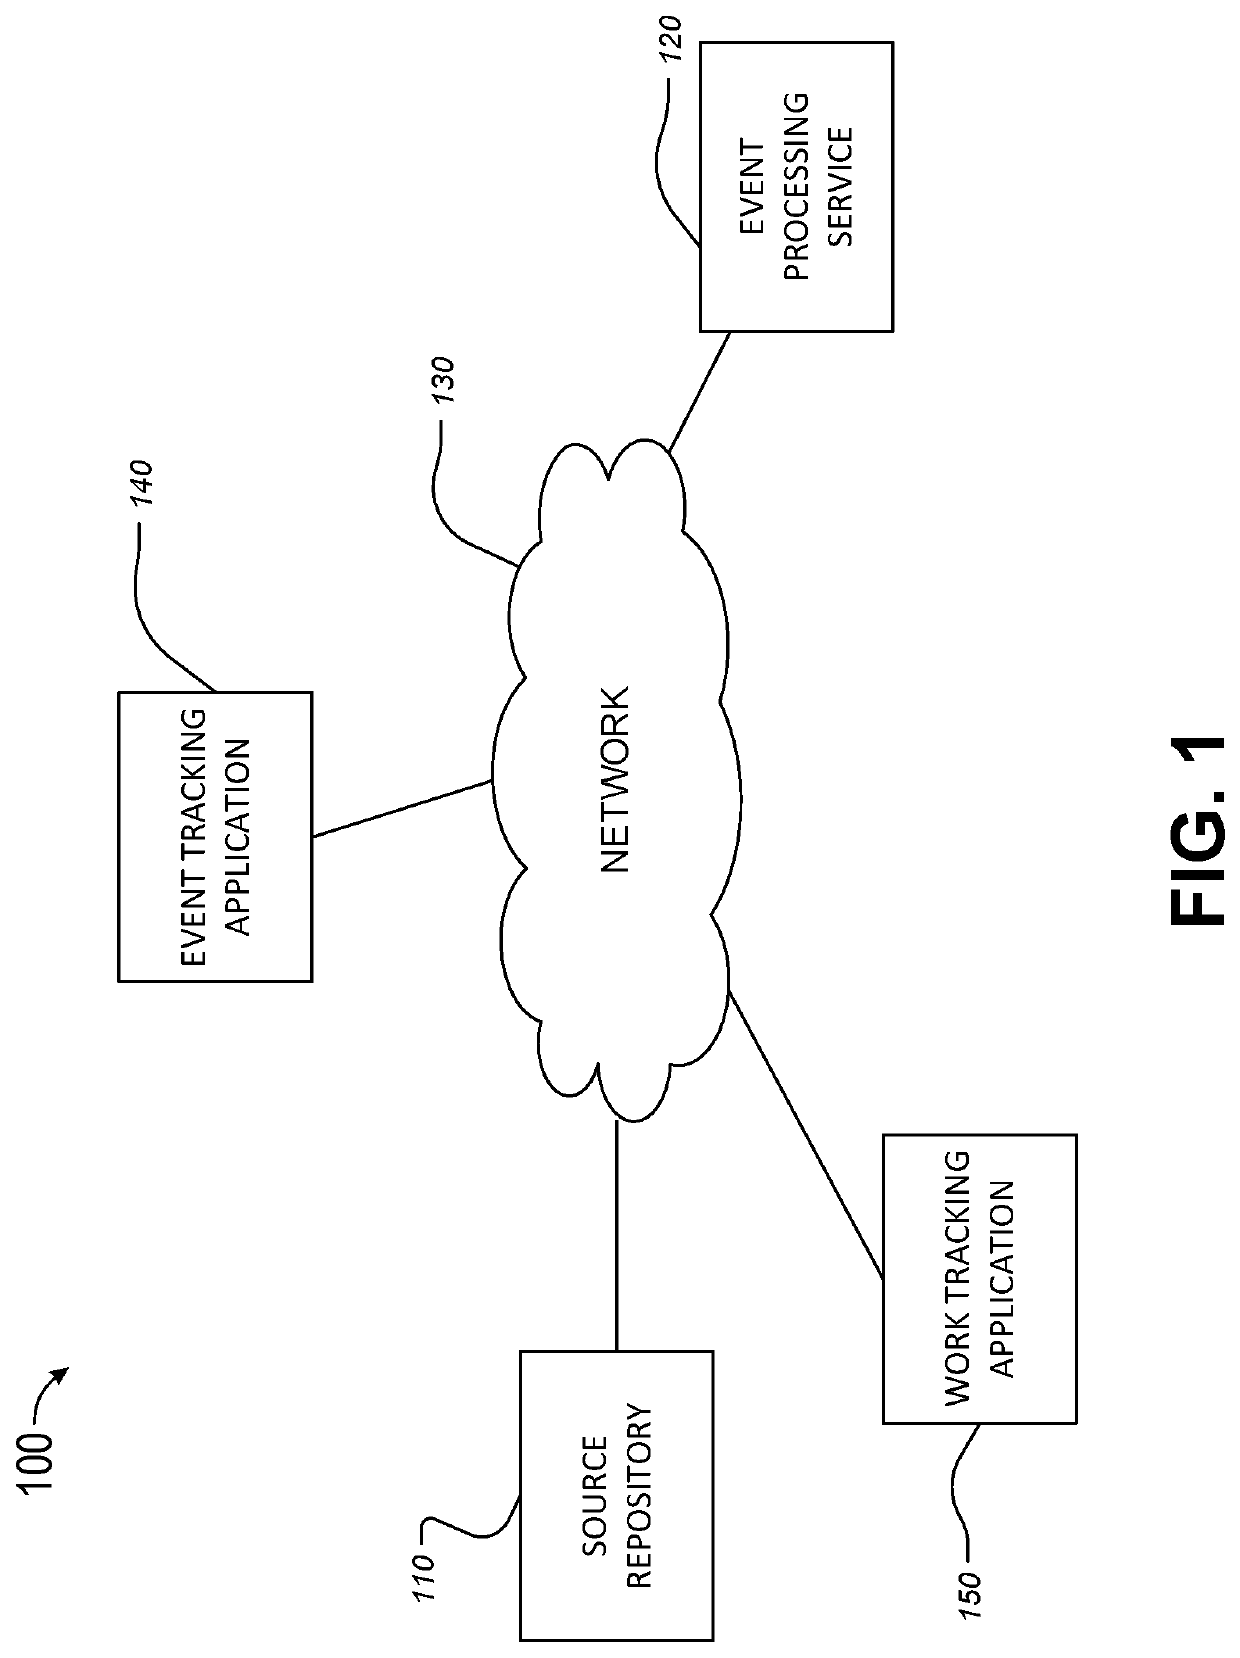 Mechanism for automatically incorporating software code changes into proper channels